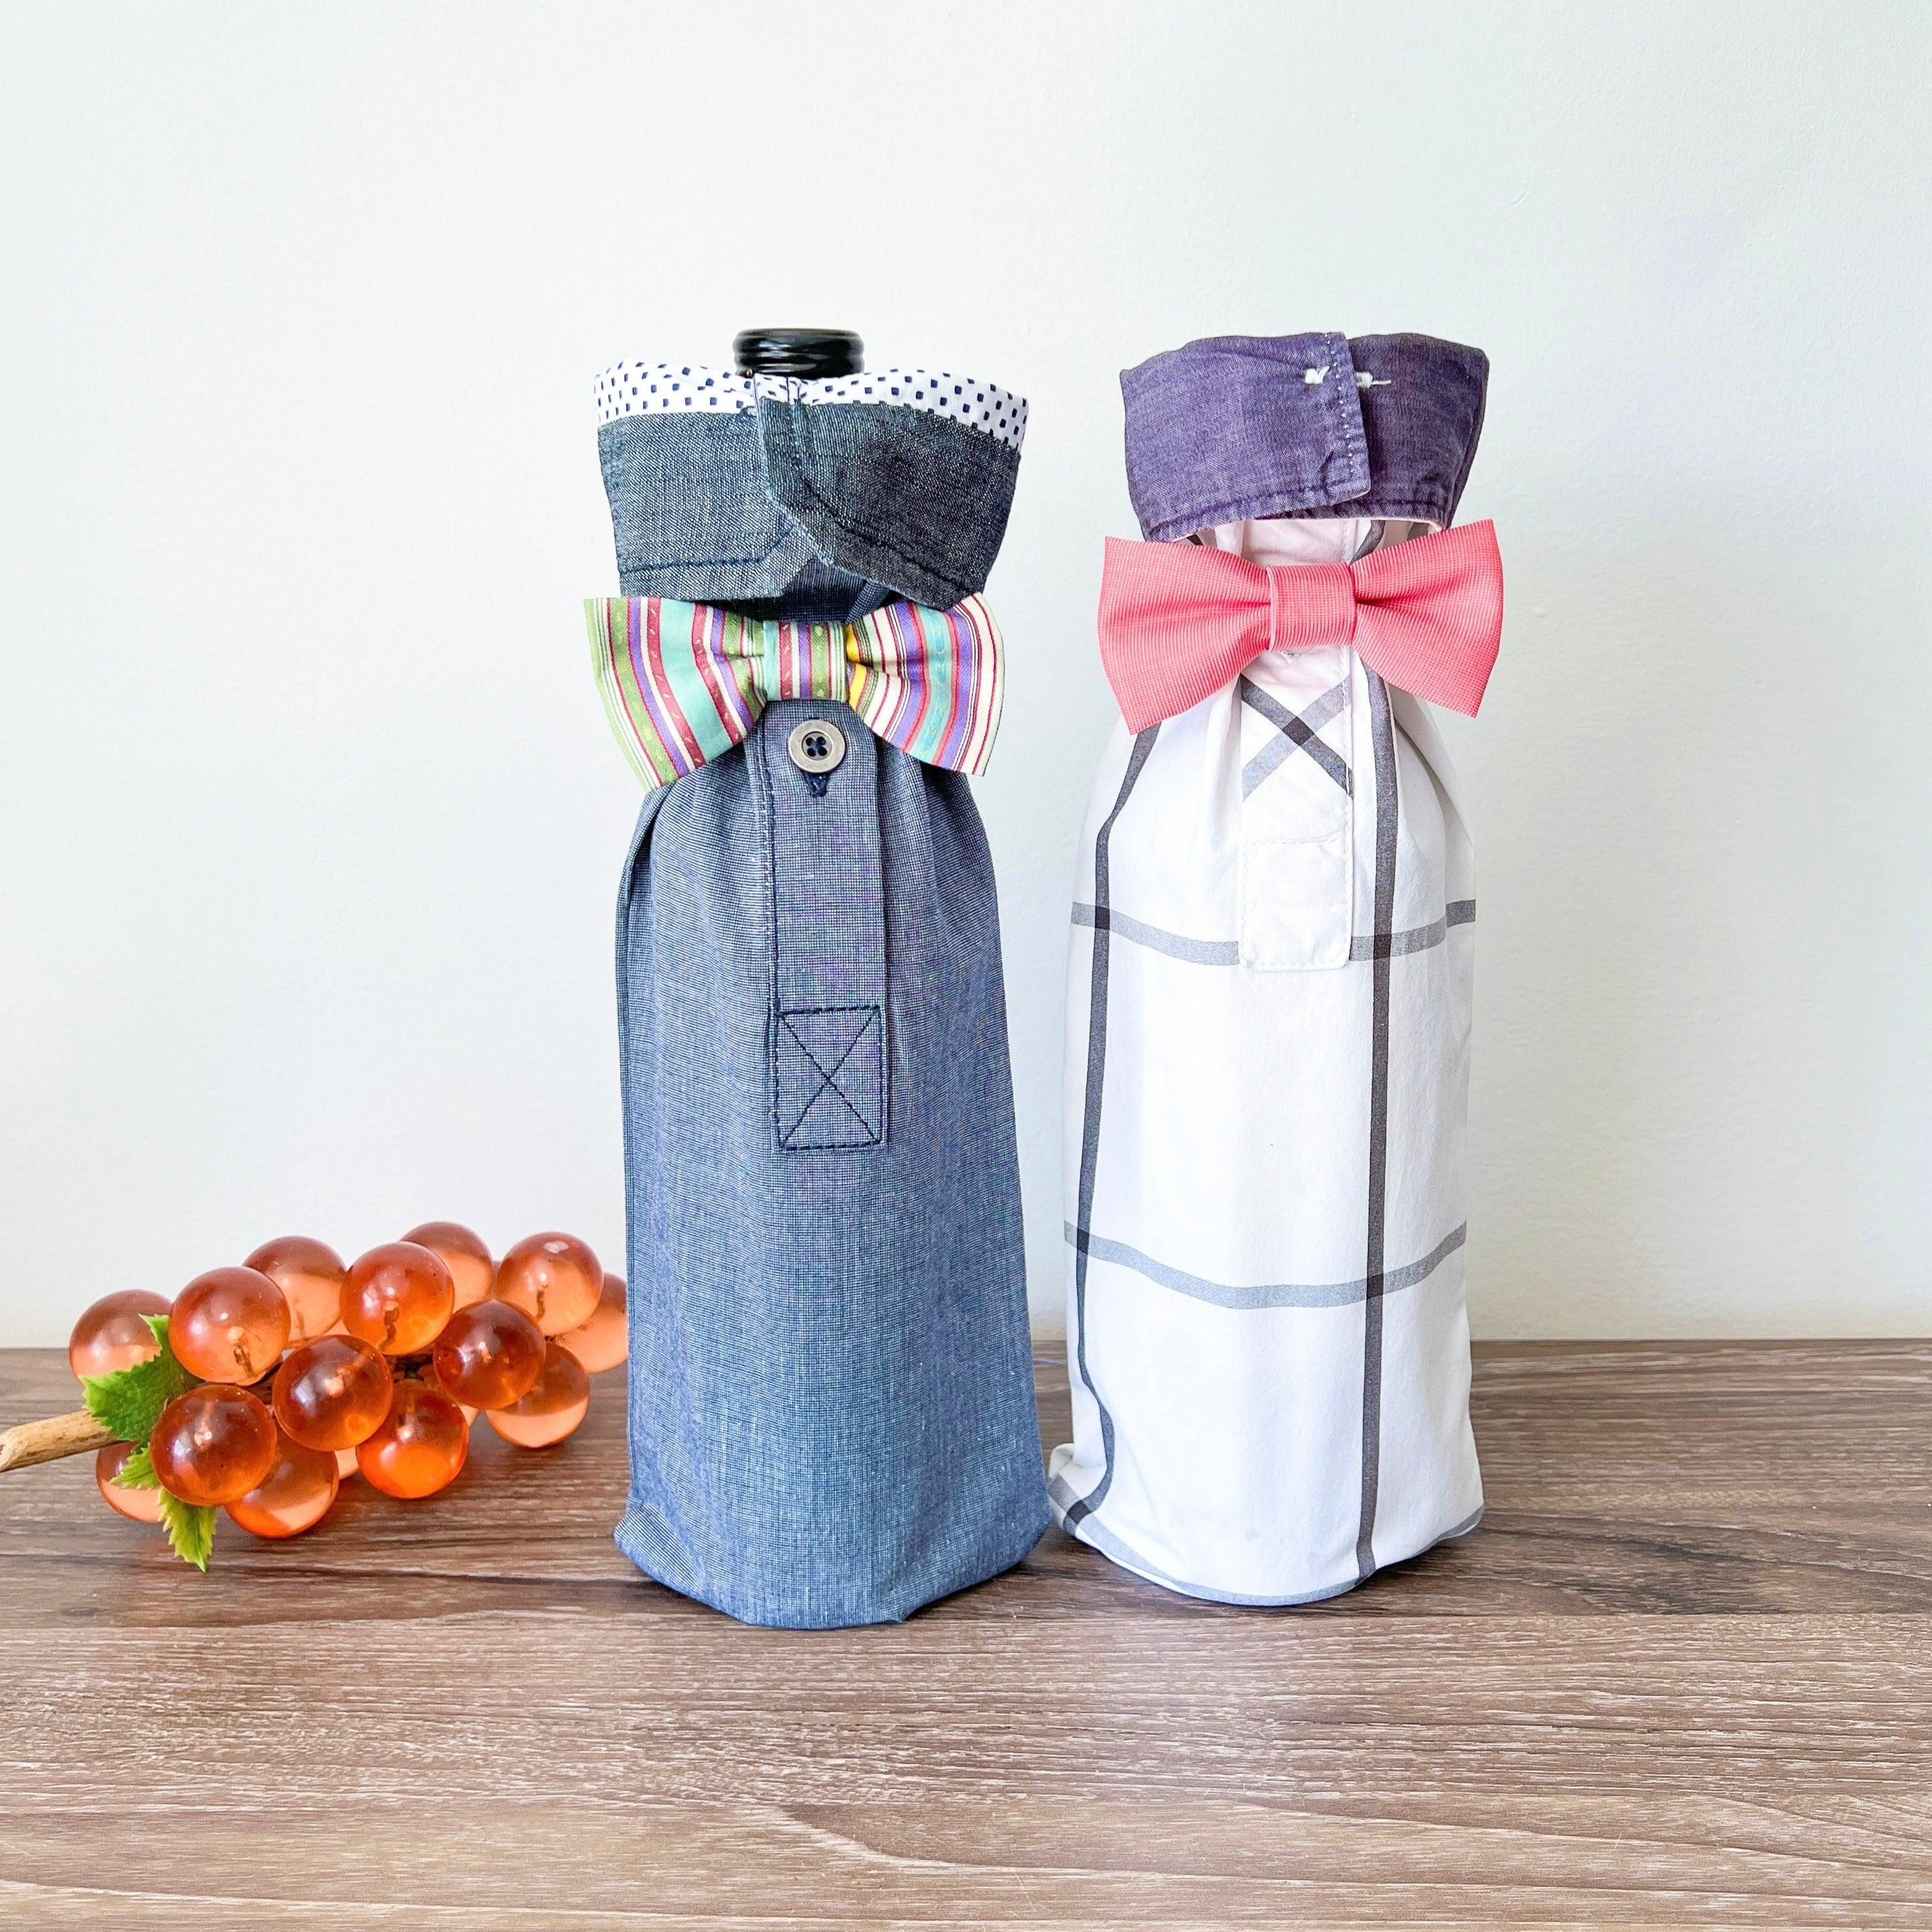 Reusable Wine Bags, Crafted from Dress Shirts for Eco-Friendly Sustainable Design